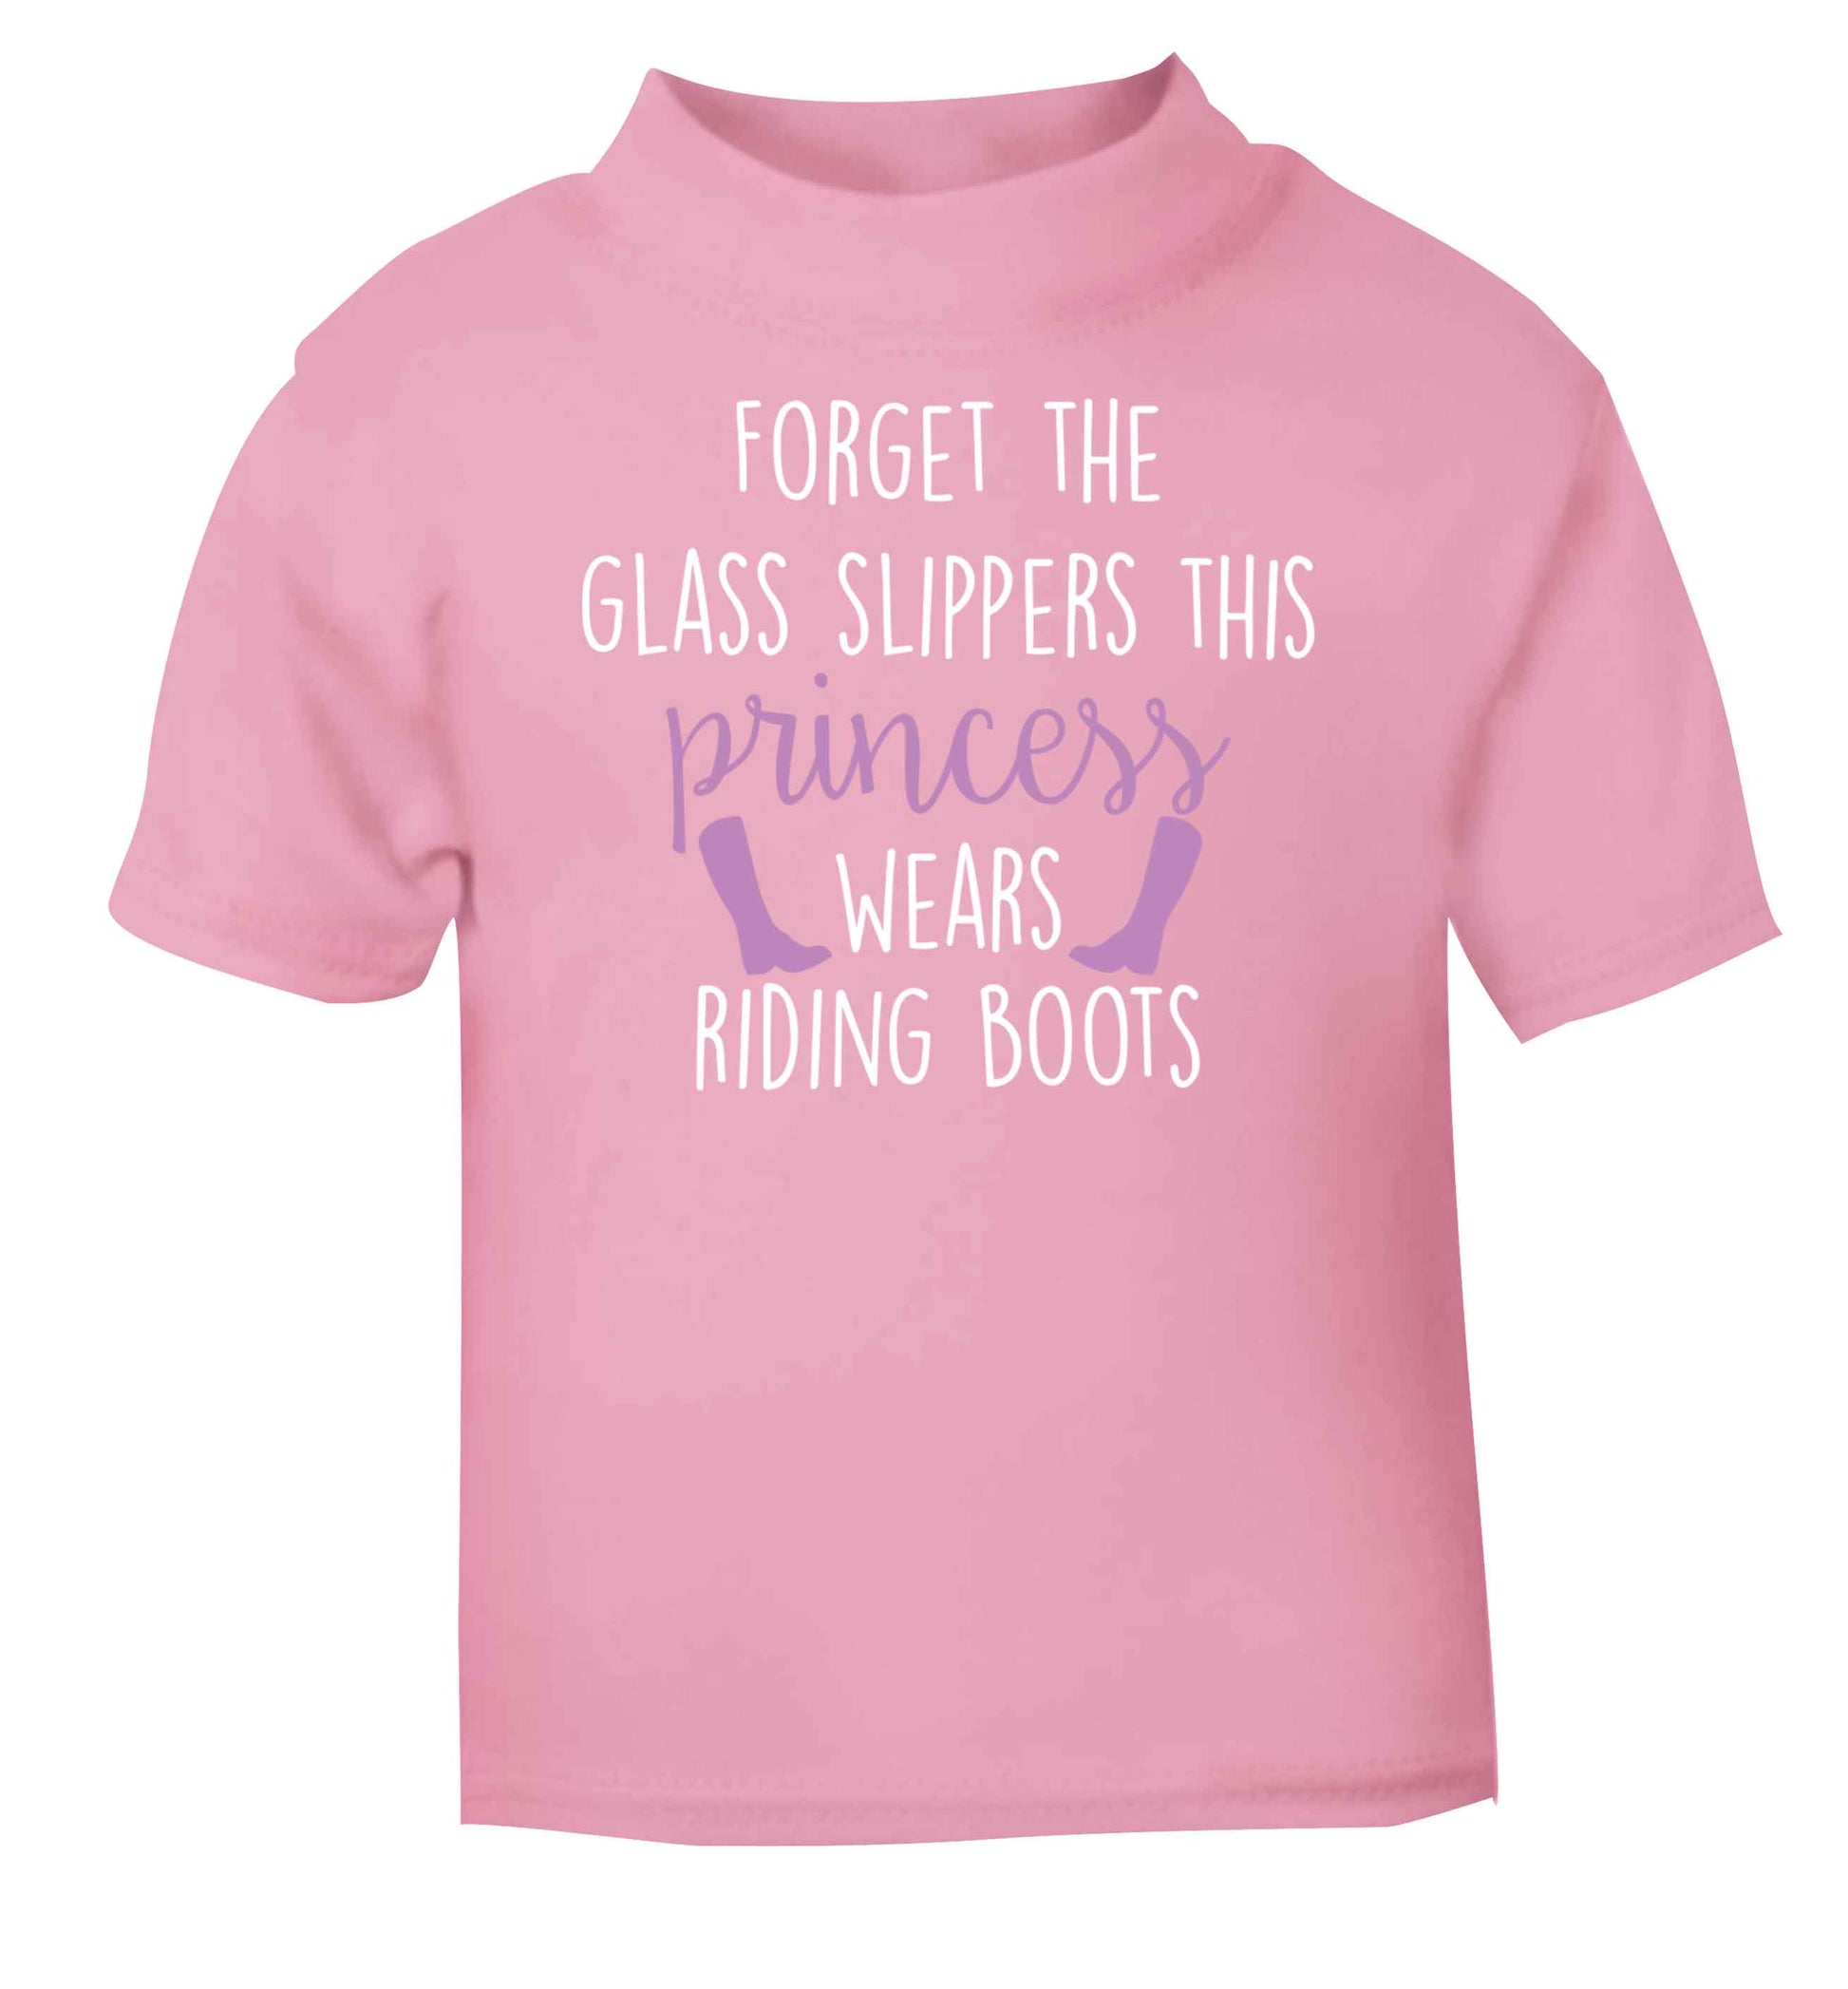 Forget the glass slippers this princess wears riding boots light pink baby toddler Tshirt 2 Years